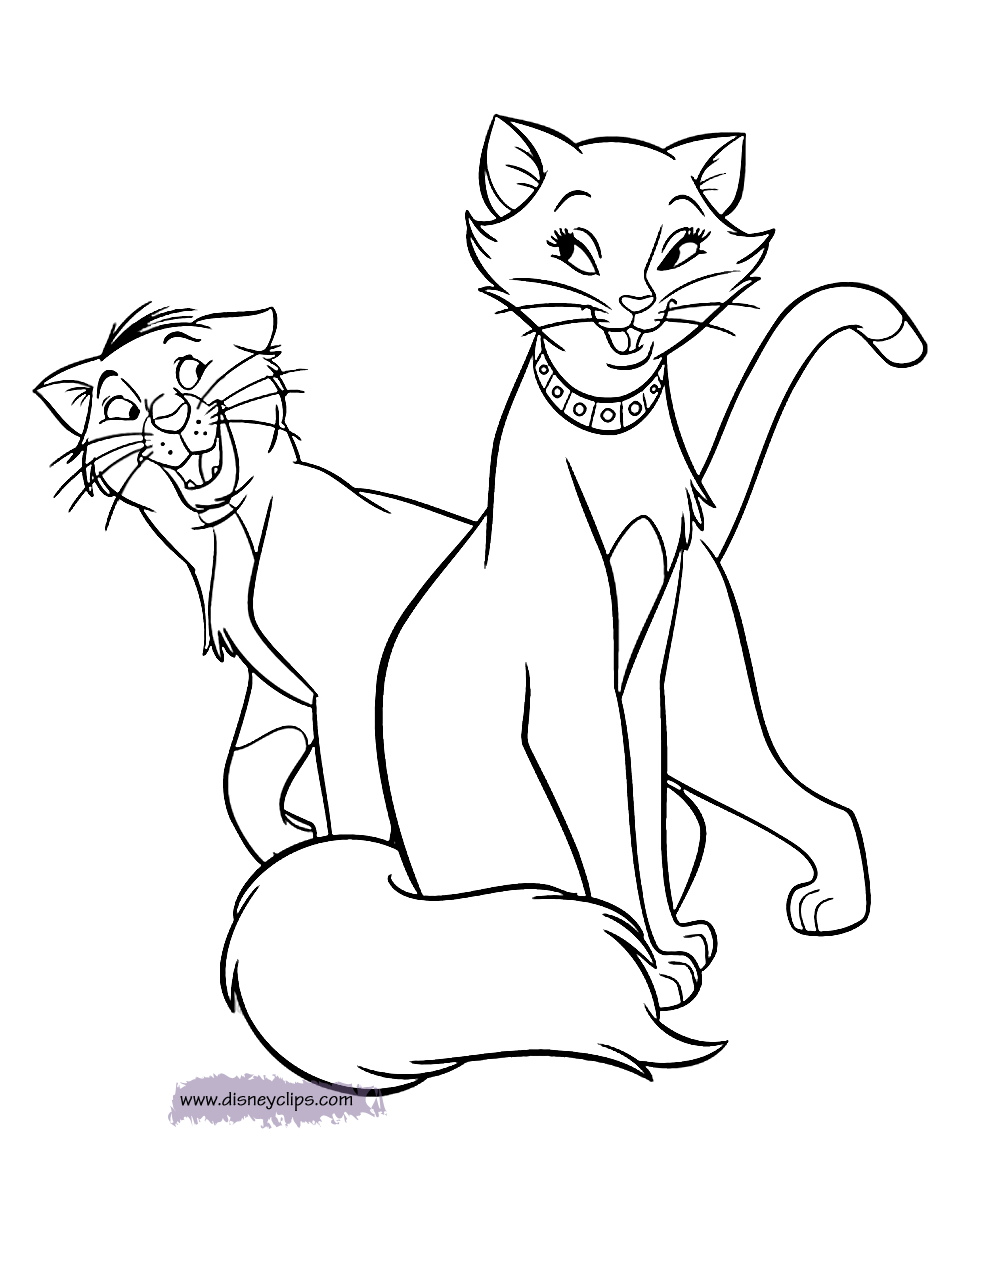 Aristocats Coloring Pages Disney Aristocats Coloring Pages 263713 ...